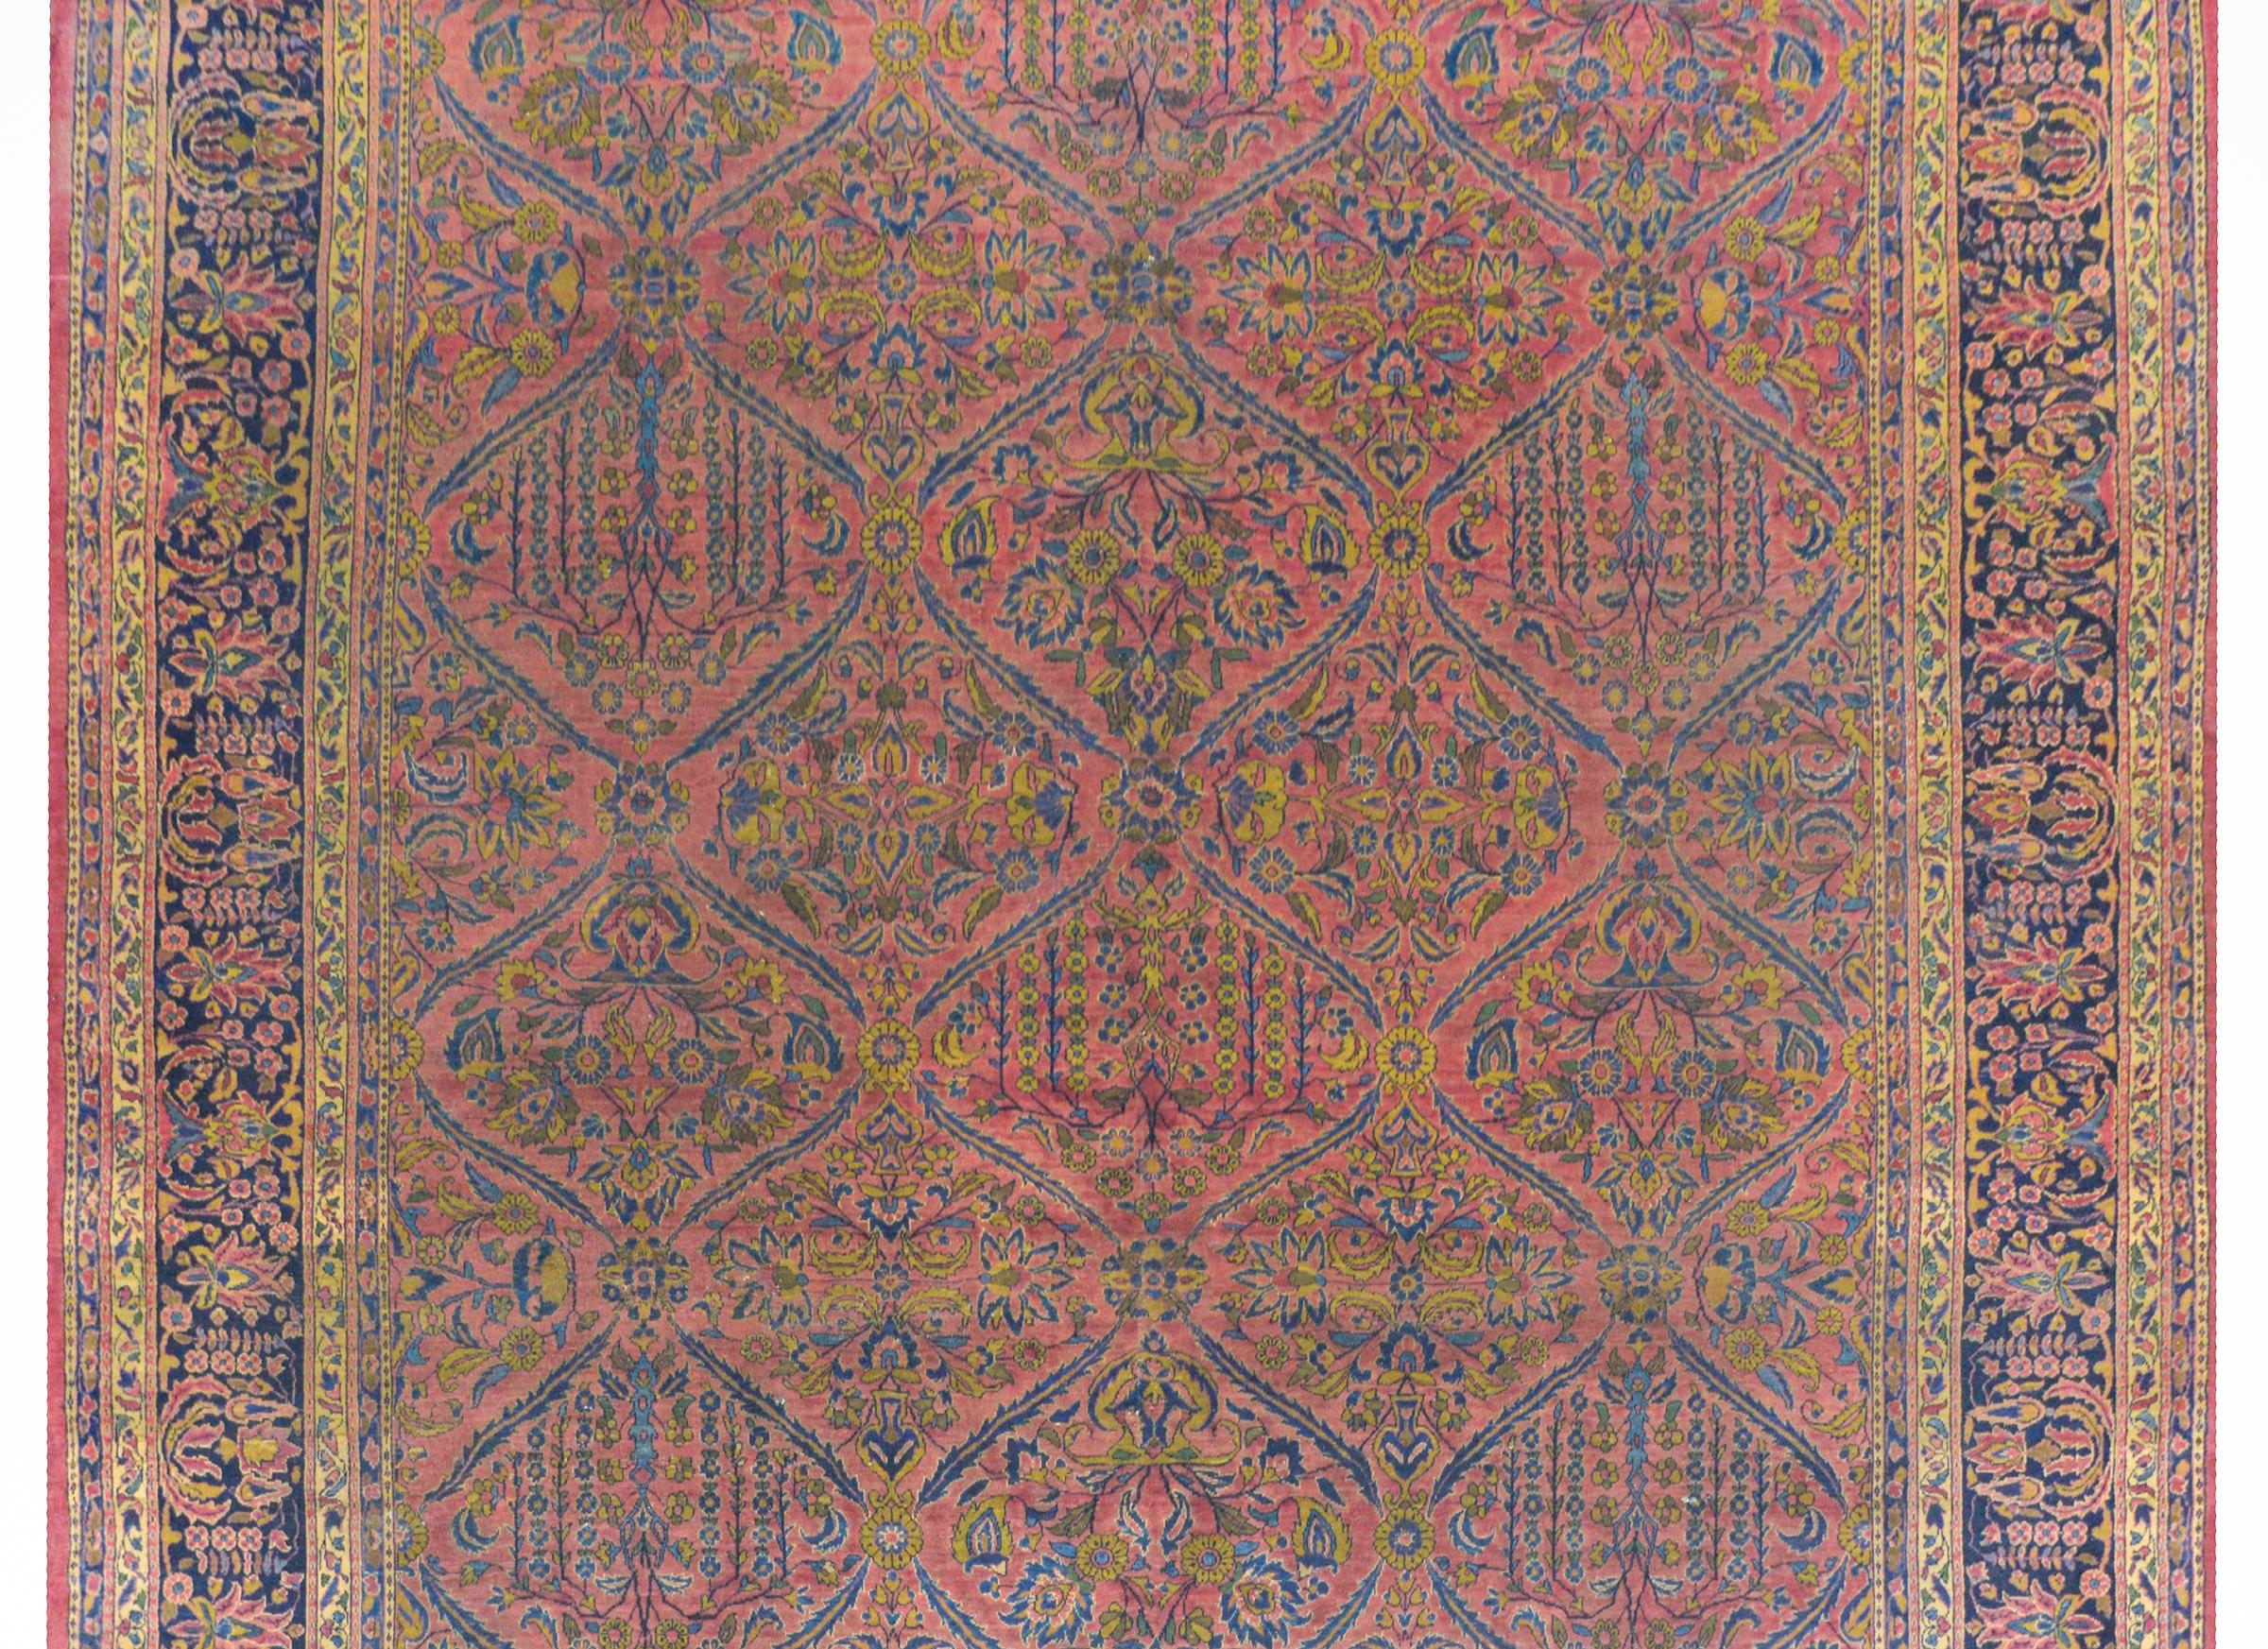 An outstanding early 20th century Persian Sarouk rug with a fantastic all-over trellis pattern containing weeping willows trees and potted blossoming flowers and vines all woven in light and dark indigo, and gold on a cranberry colored background.